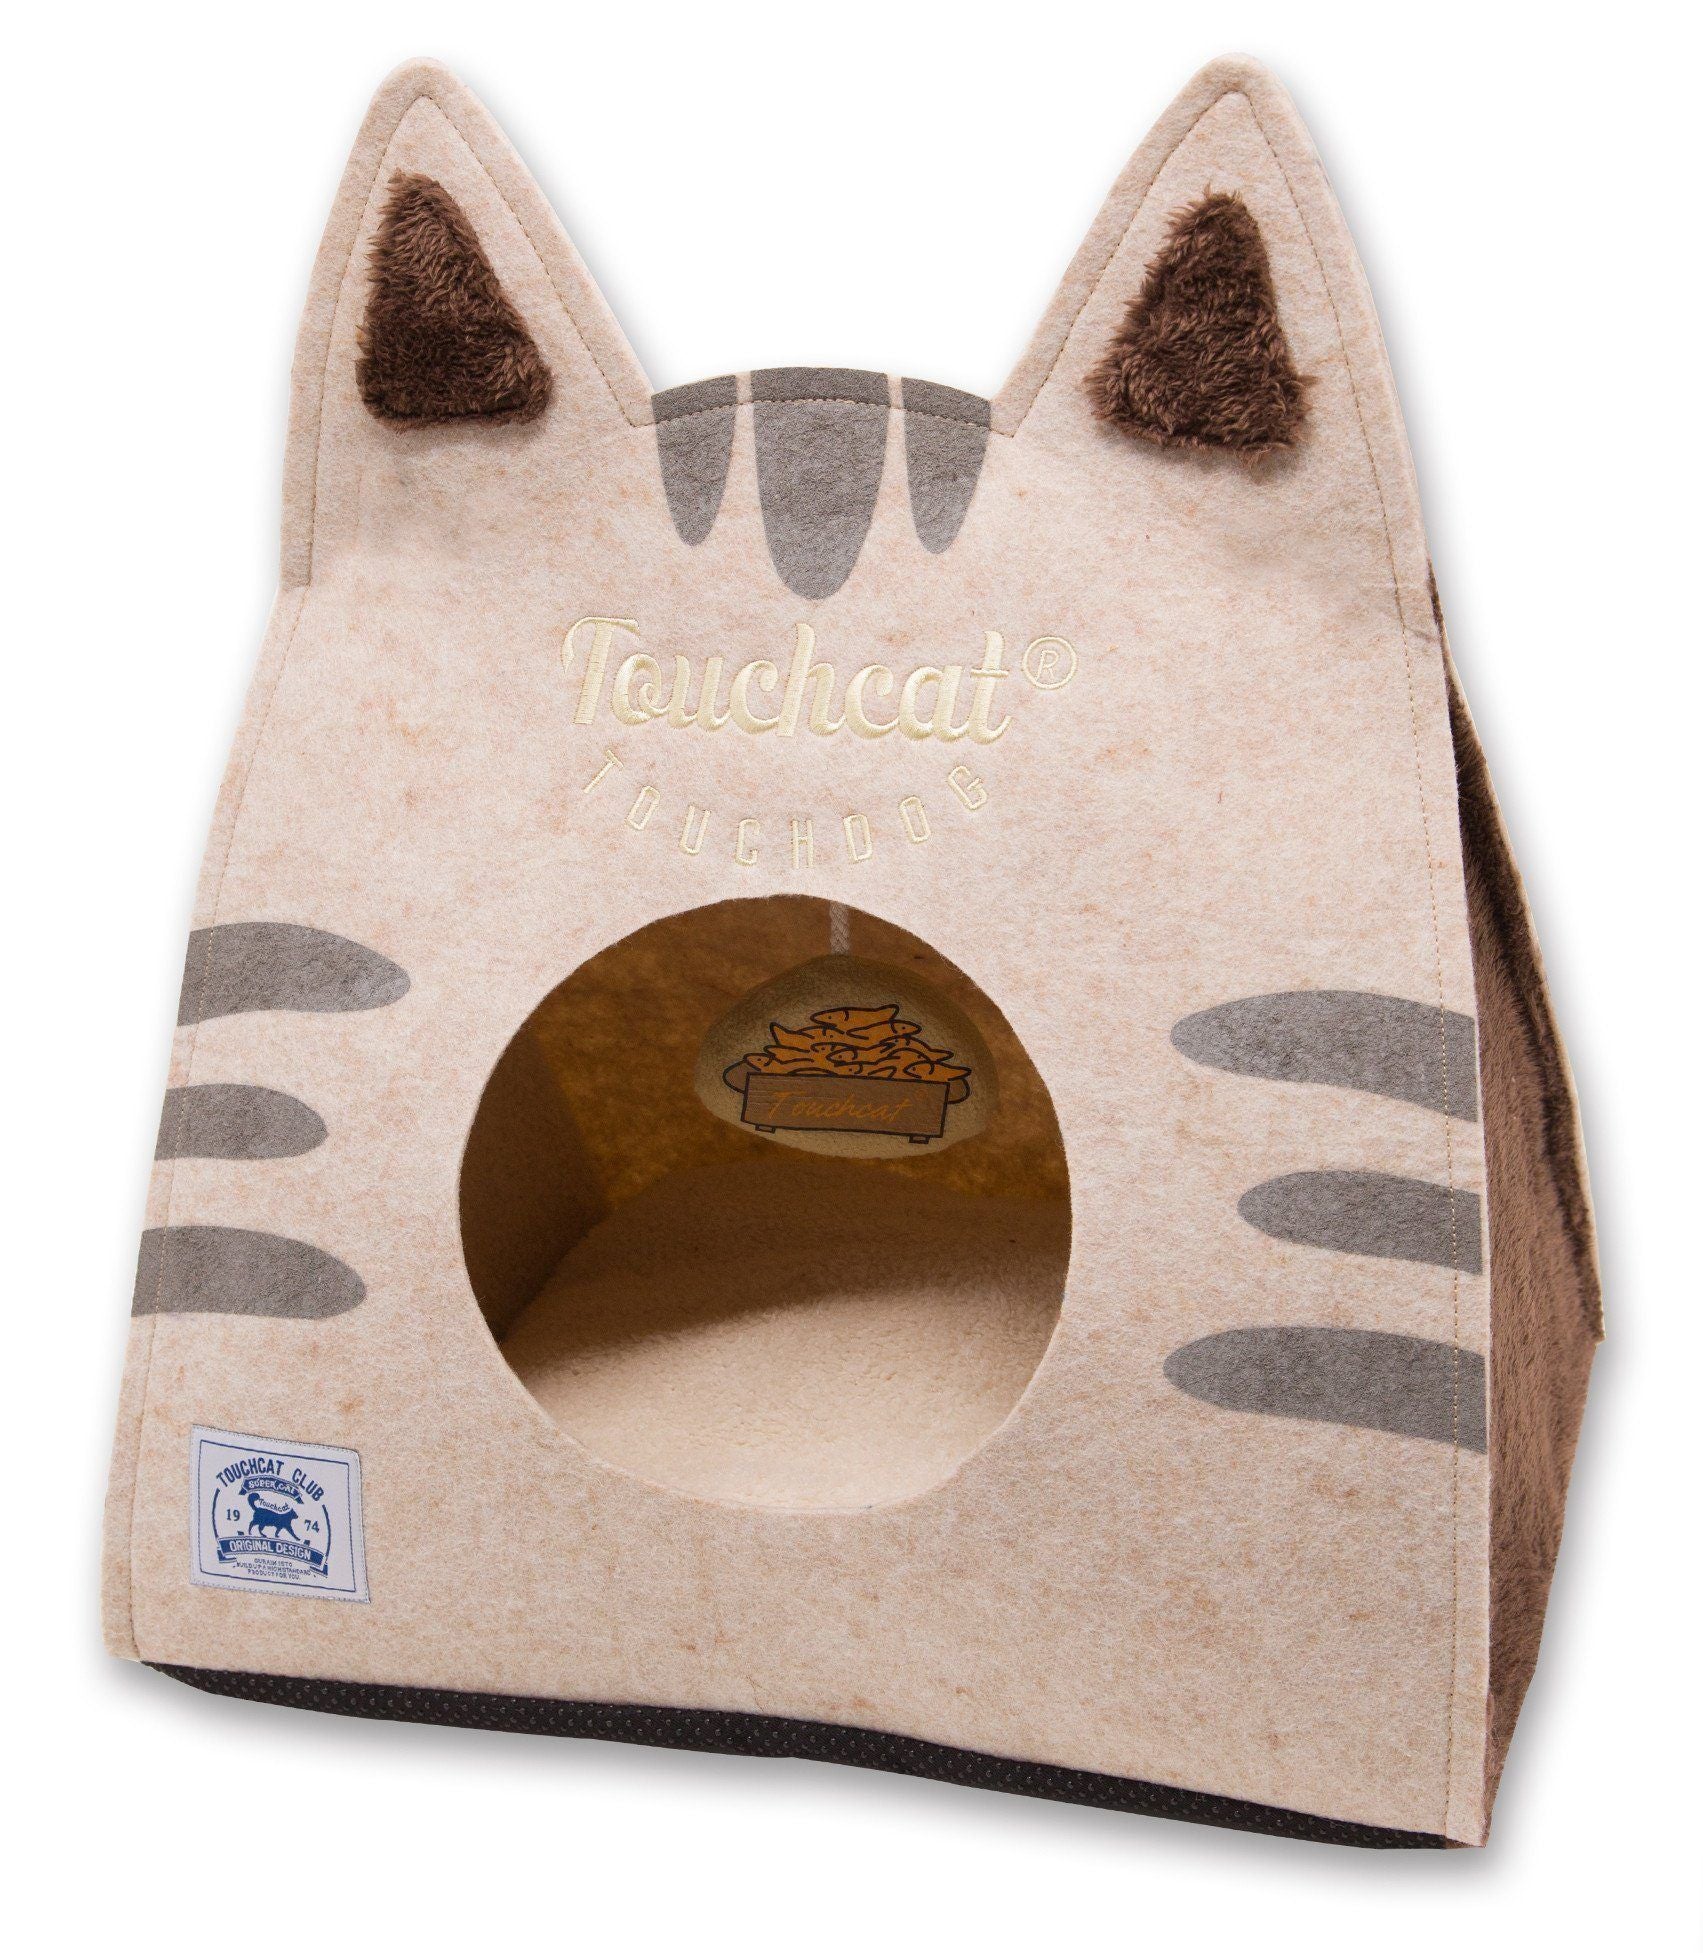 Touchcat ® 'Kitty Ears' Travel On-The-Go Folding Designer Fashion Pet Cat Bed House w/ Hanging Teaser Toy Brown 